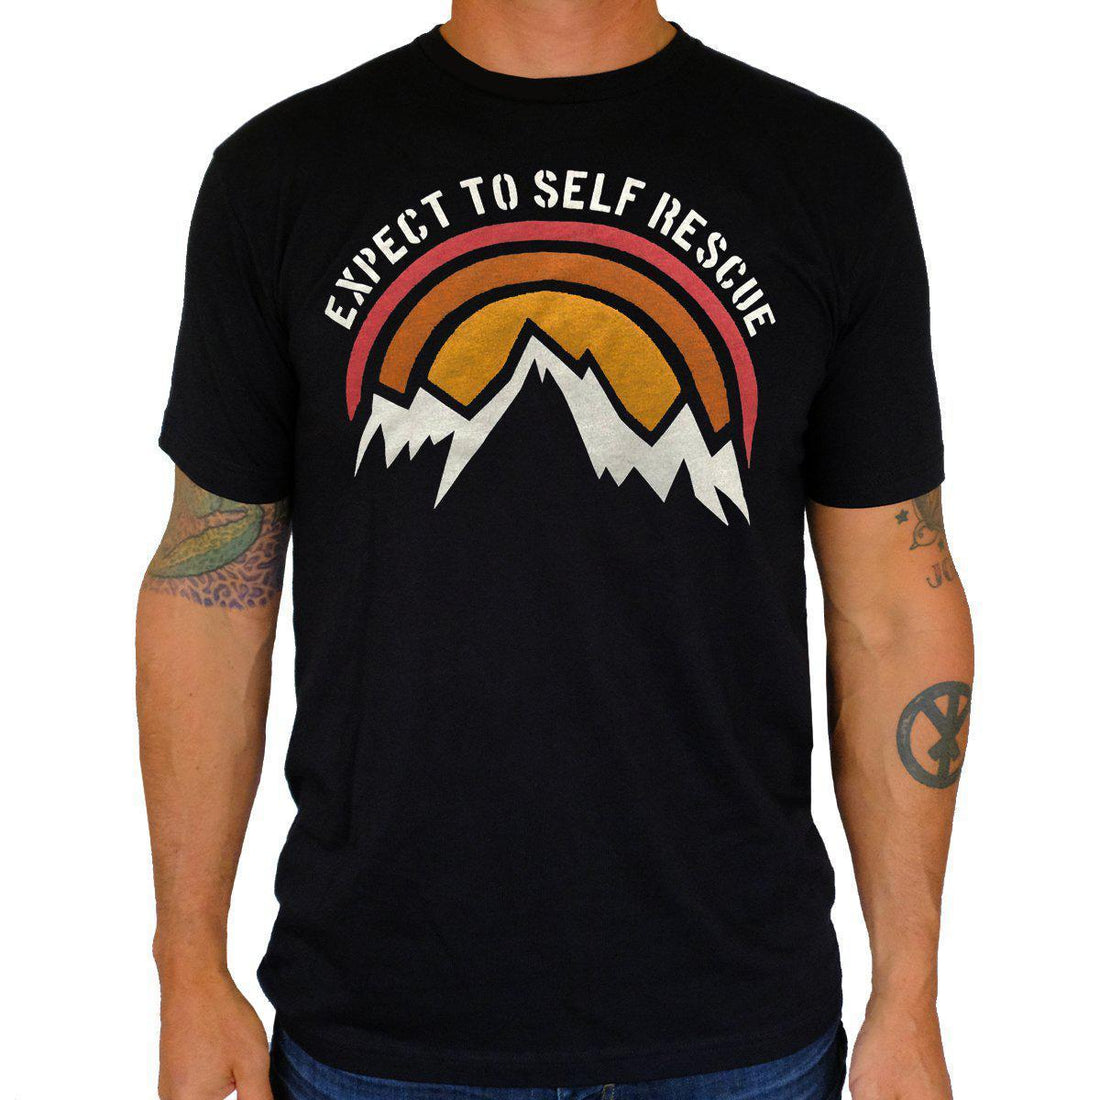 Apparel - Tops - T-Shirts - Thirty Seconds Out Expect To Self Rescue T-Shirt